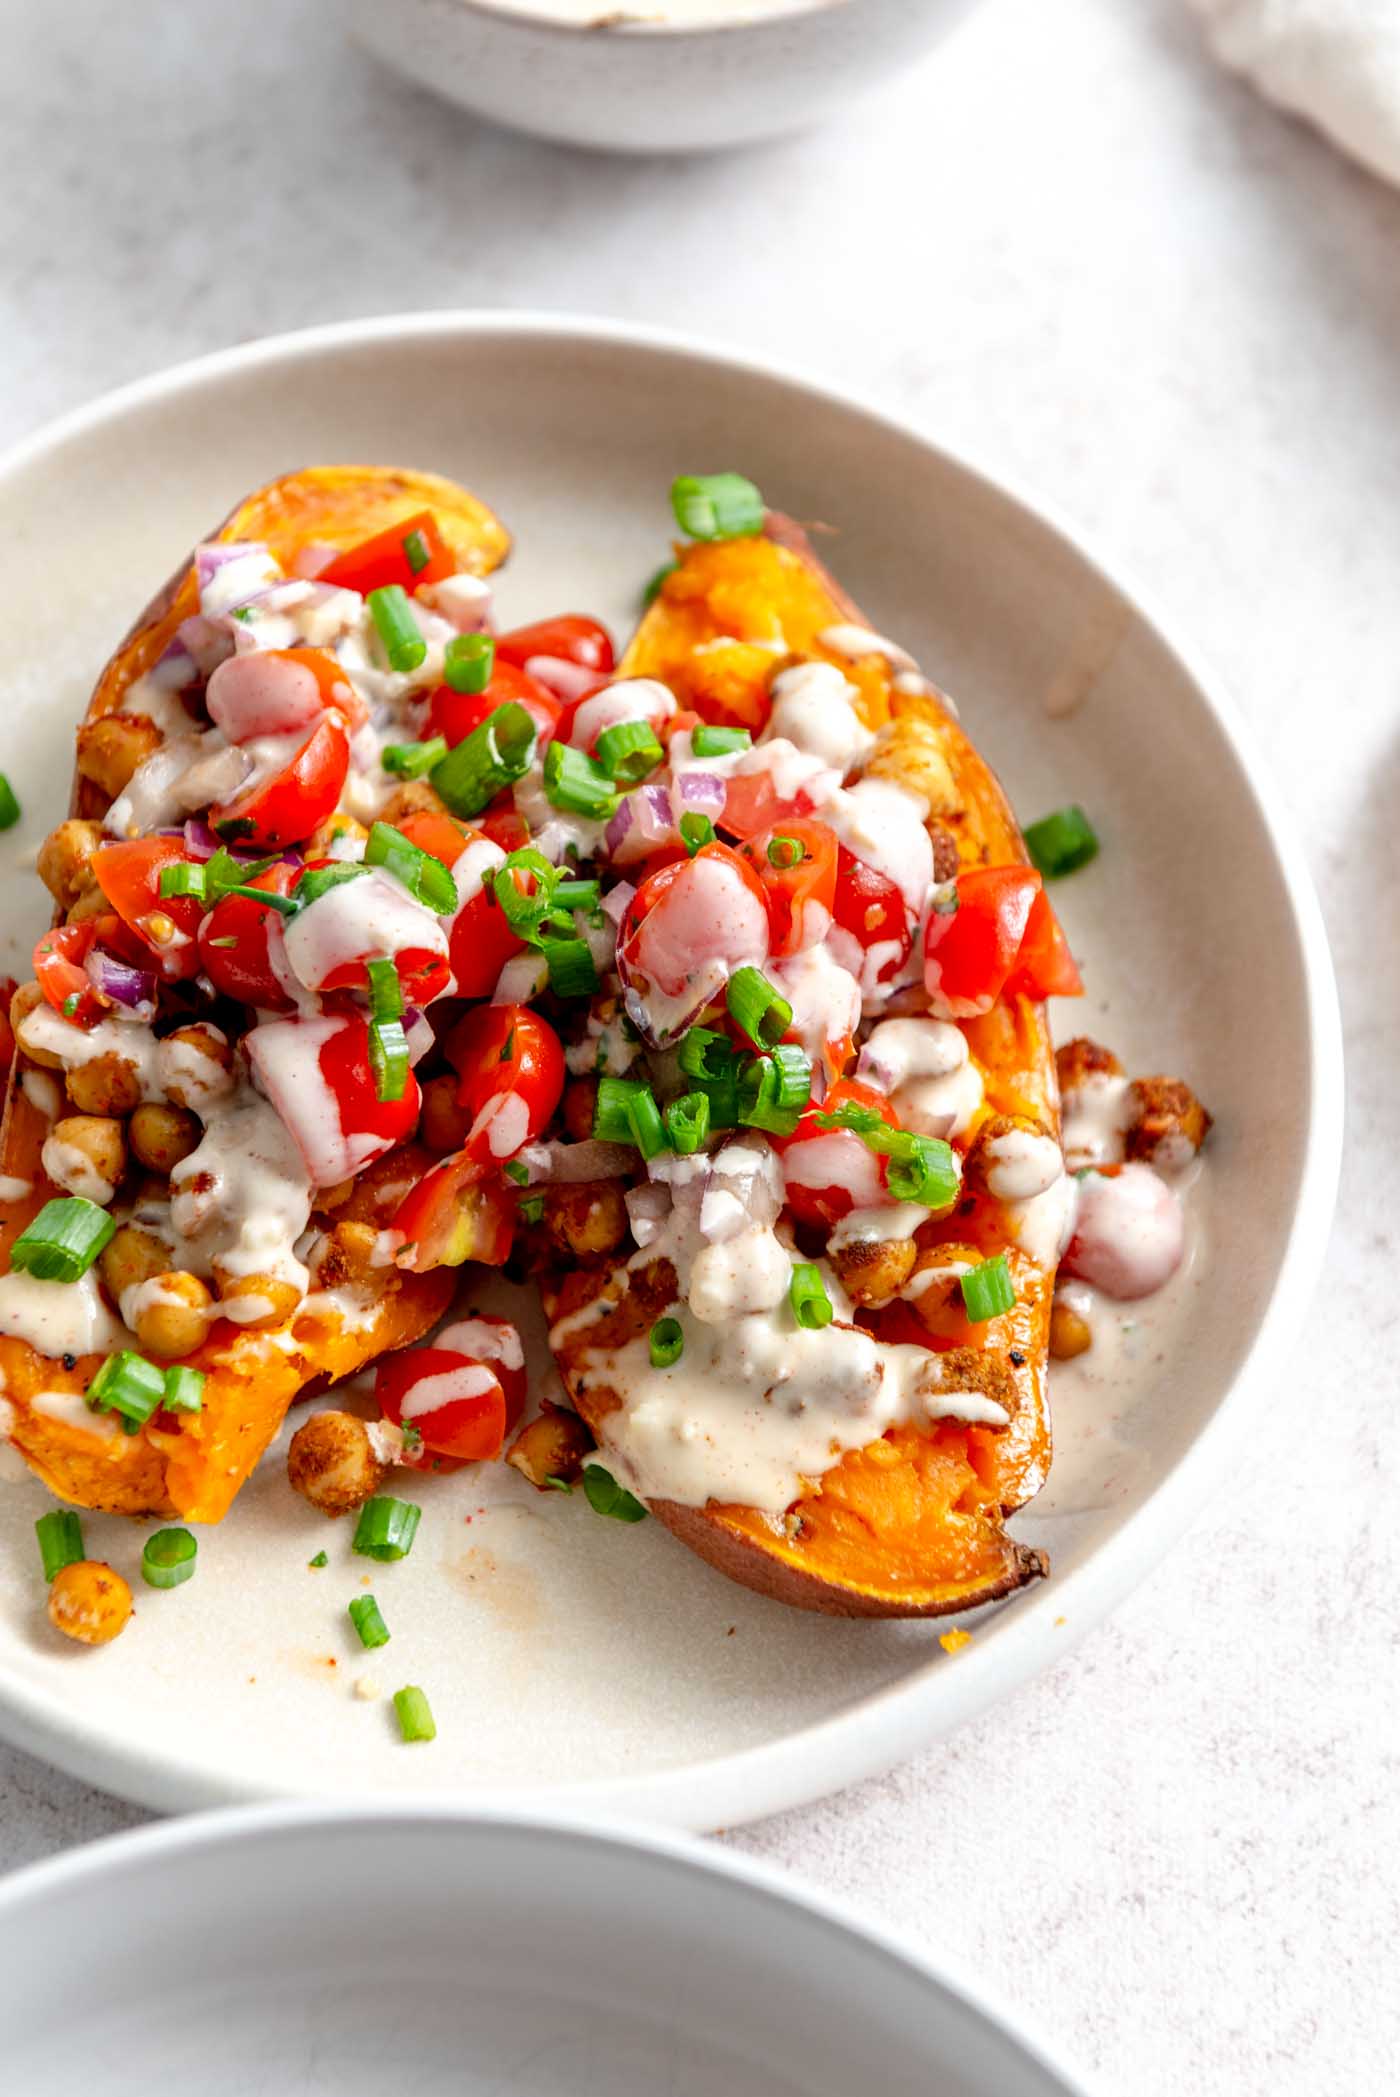 Two baked sweet potato halves topped with chickpeas, cherry tomatoes, parsley and tahini sauce.